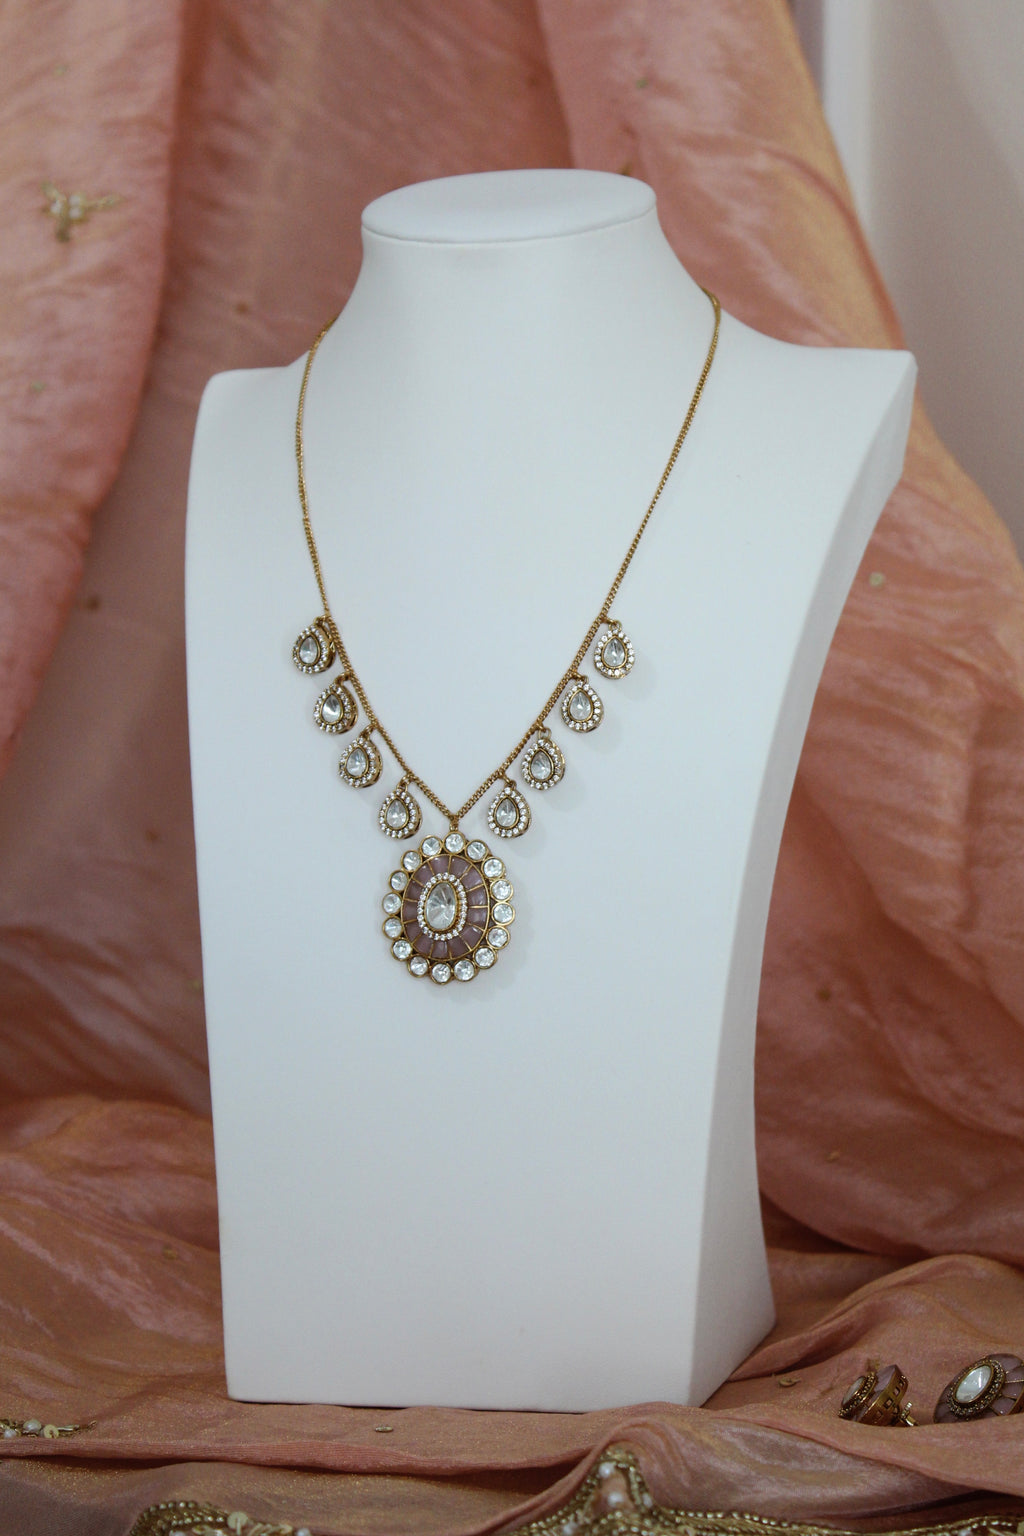 Necklace with studs